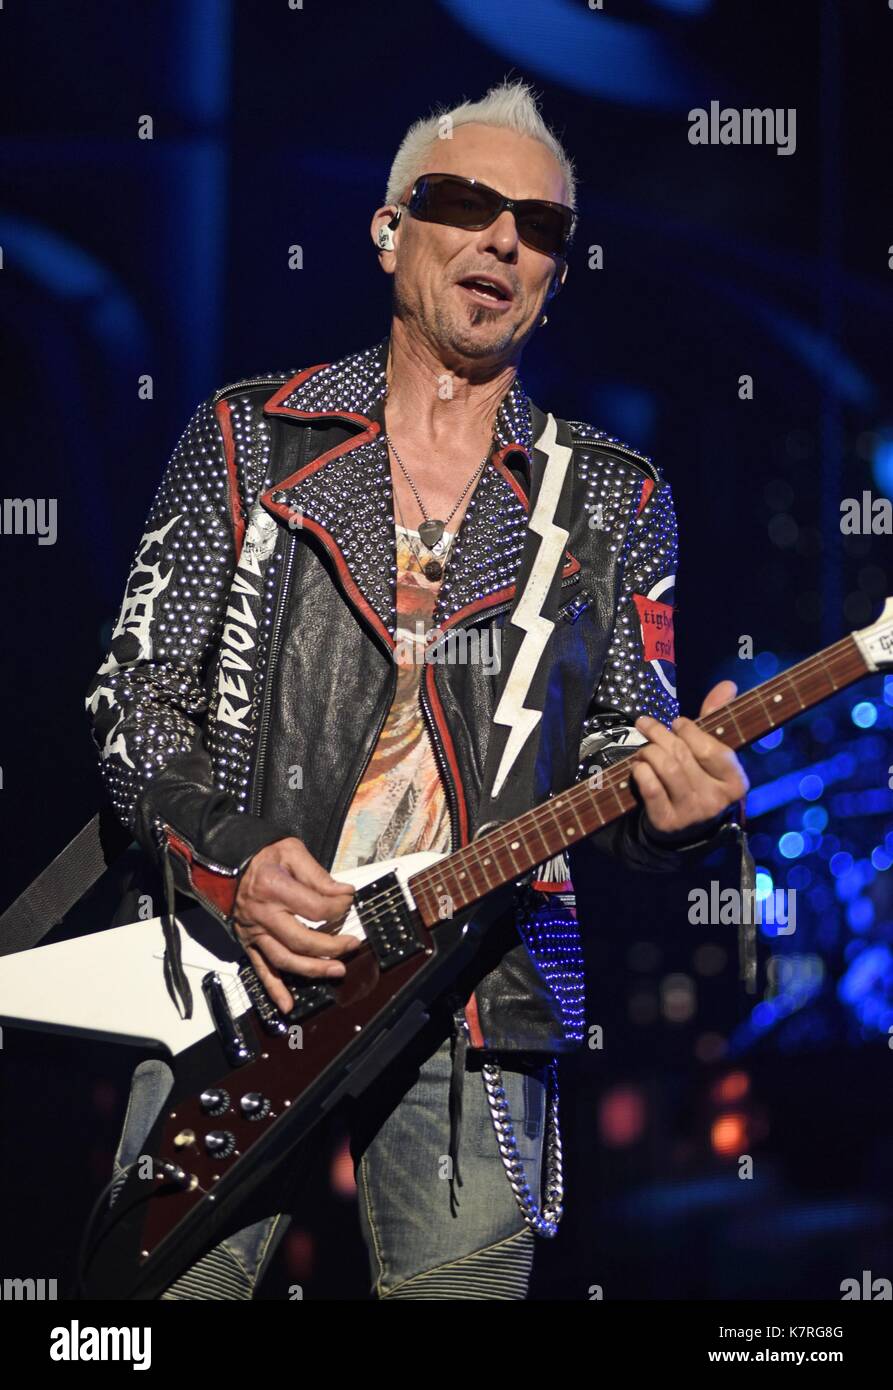 Rudolf schenker hi-res stock photography and images - Alamy